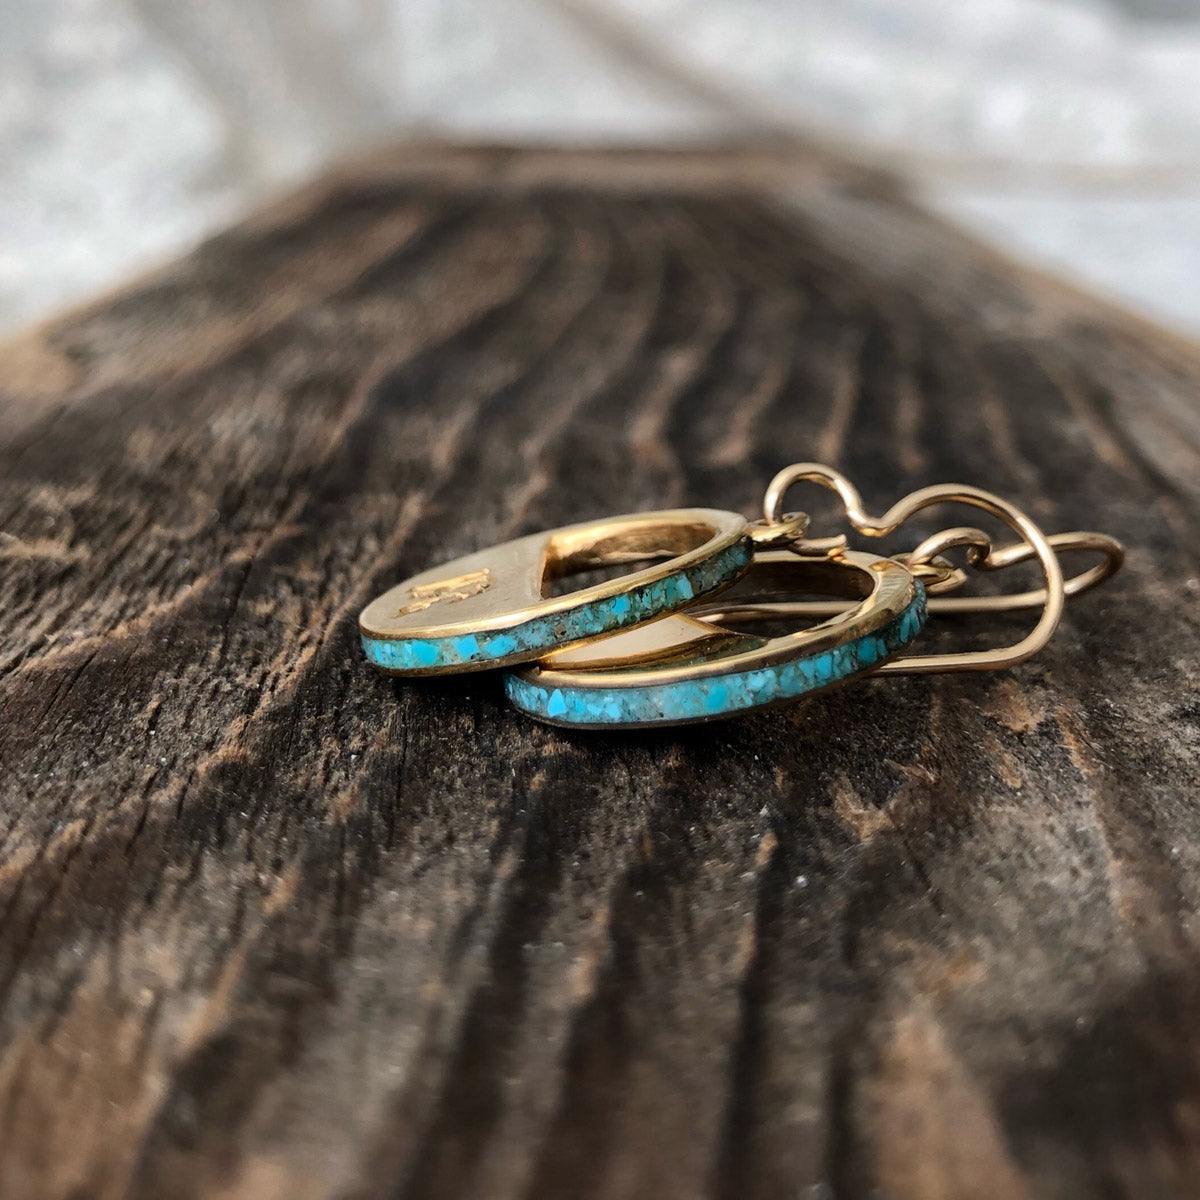 Turquoise, Gold Plated Earrings | Narrow-Gauge Designs